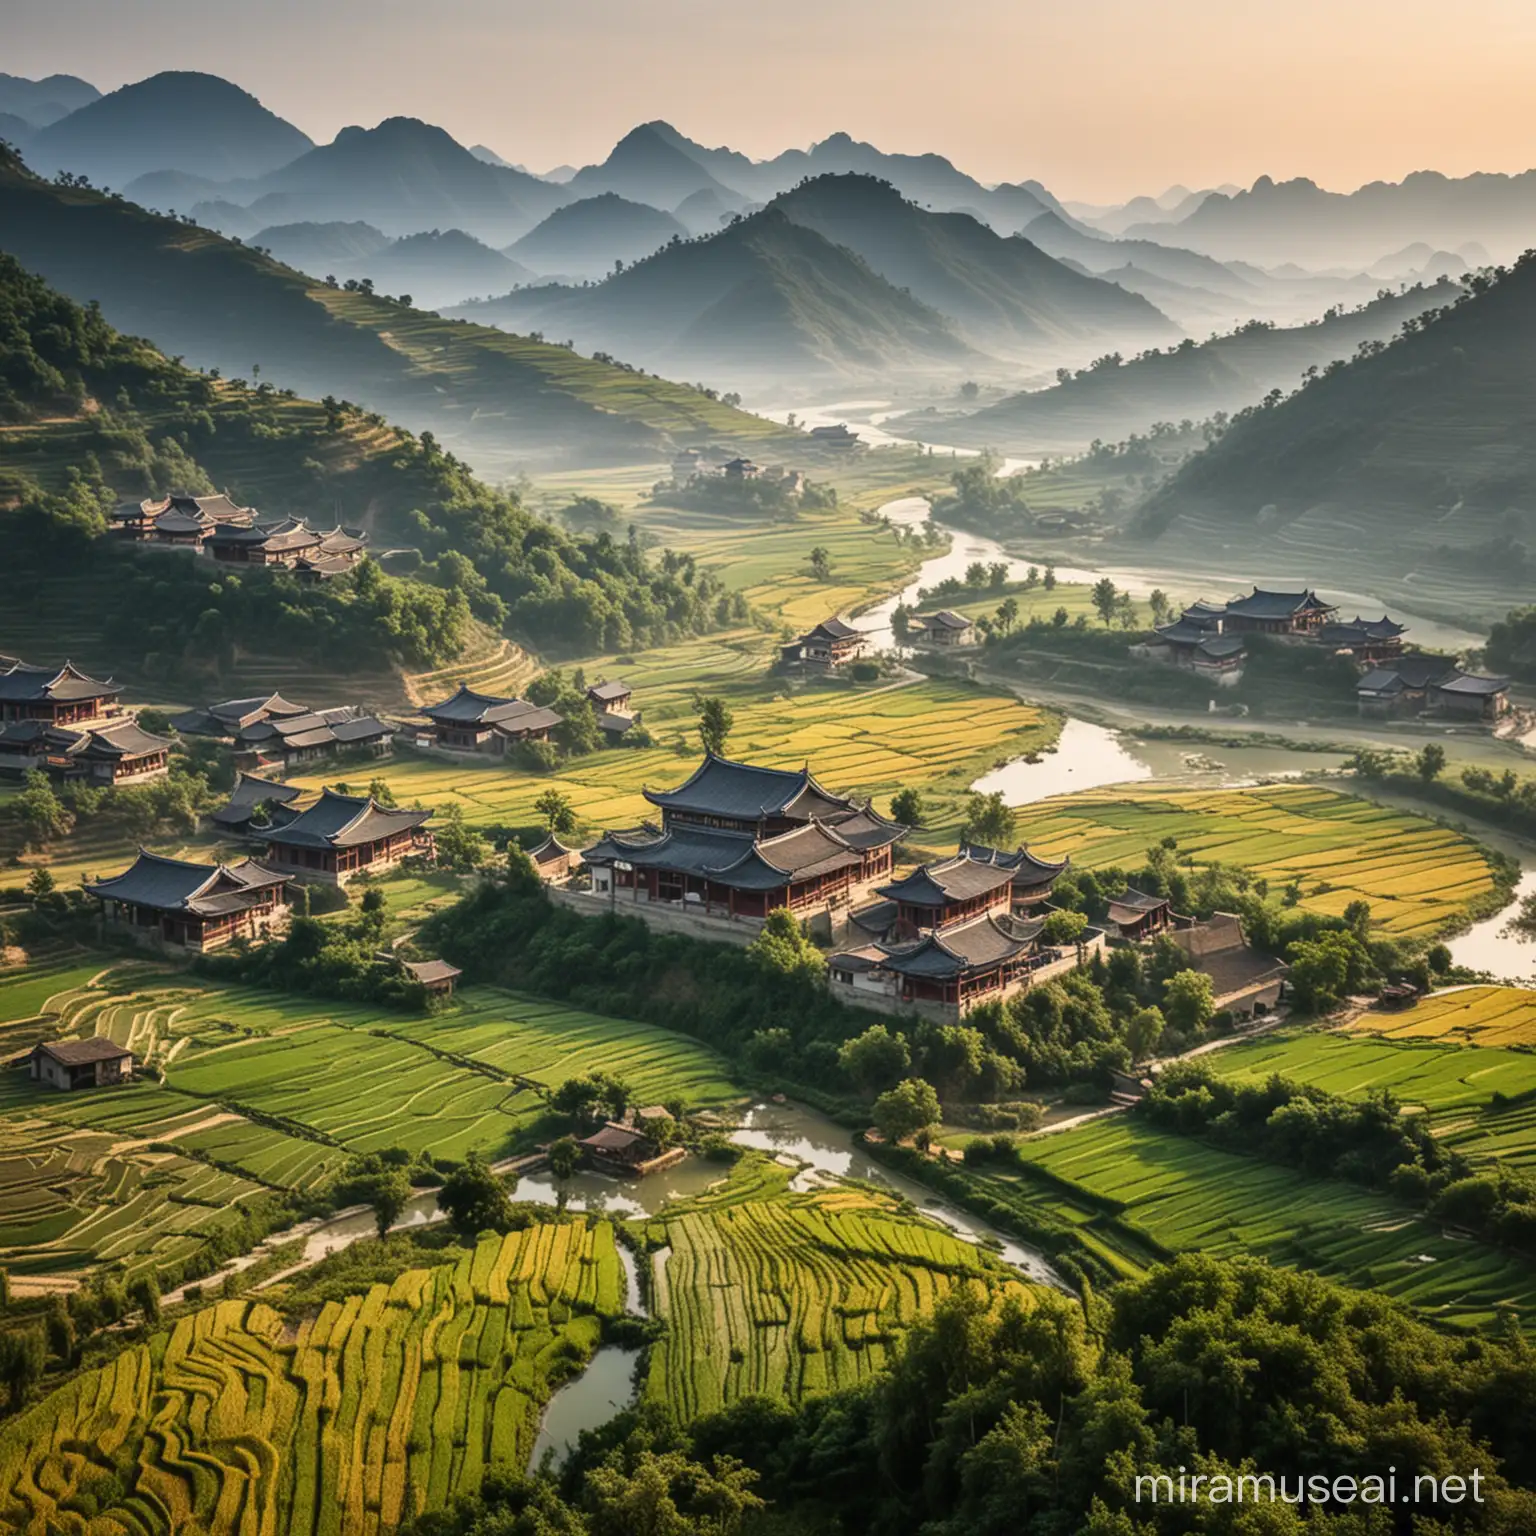 Scenic Rural China Landscape with Rolling Hills and Rice Terraces